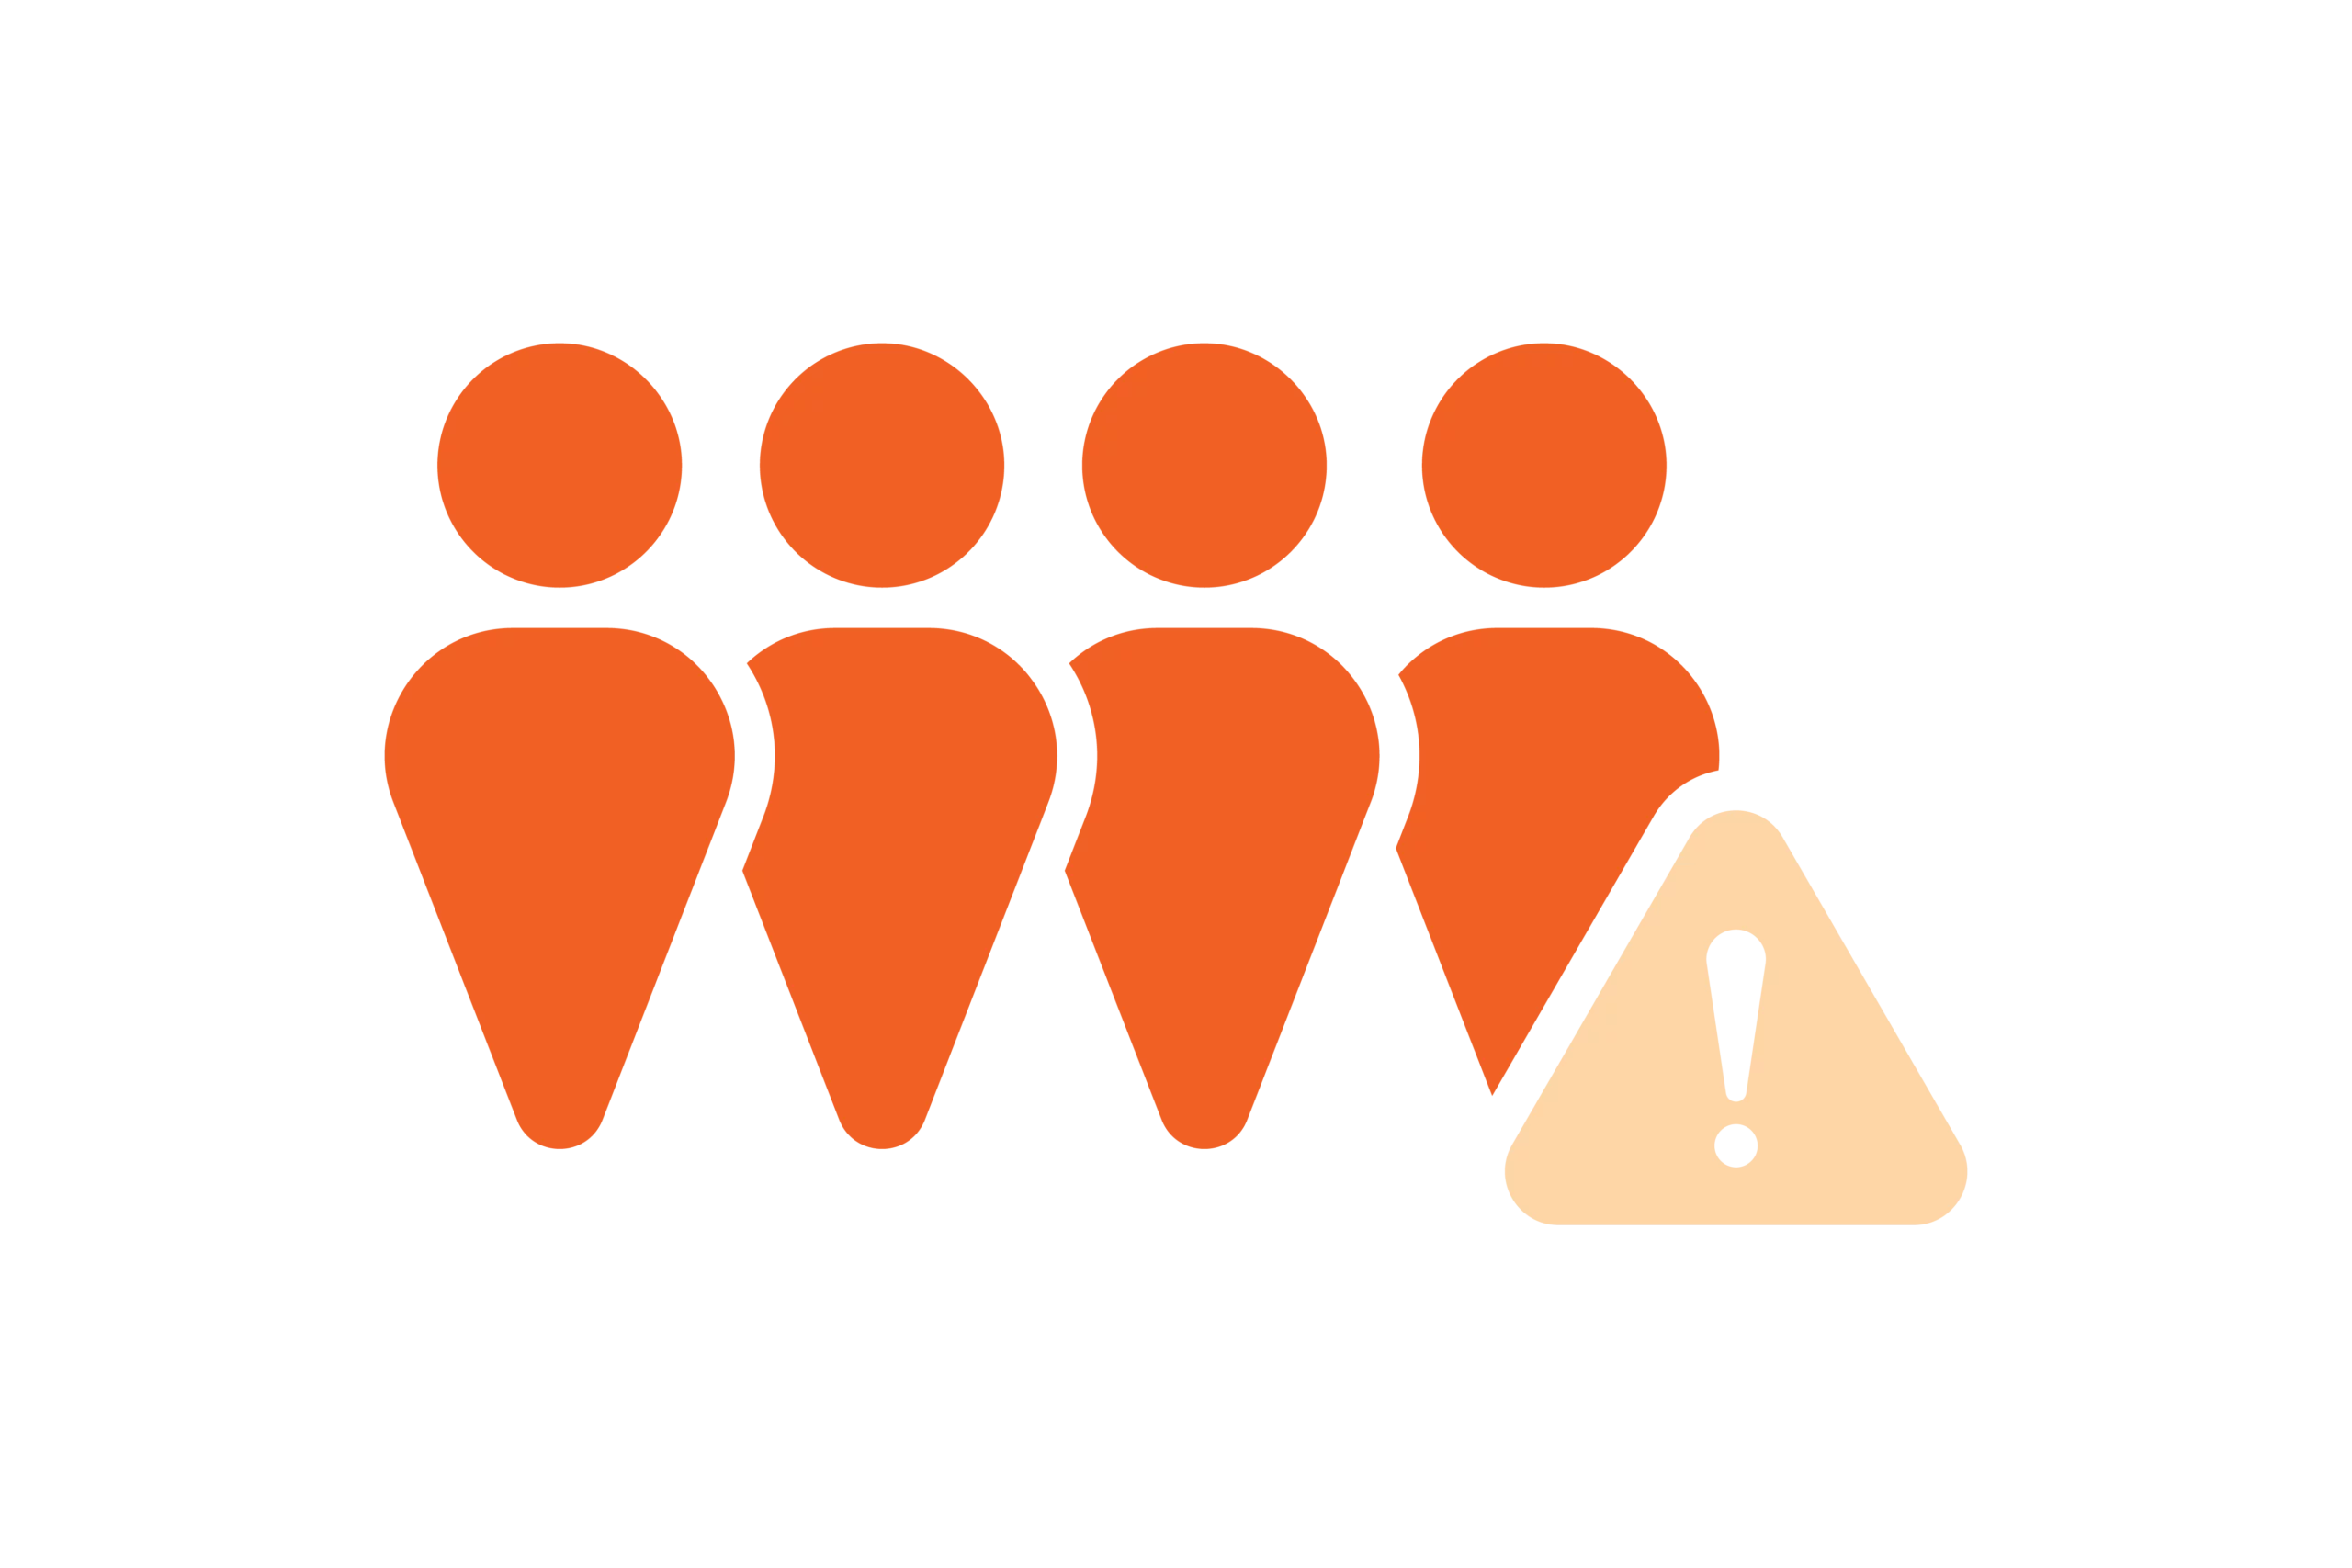 Illustration of four people with a triangular shape containing an exclamation mark.